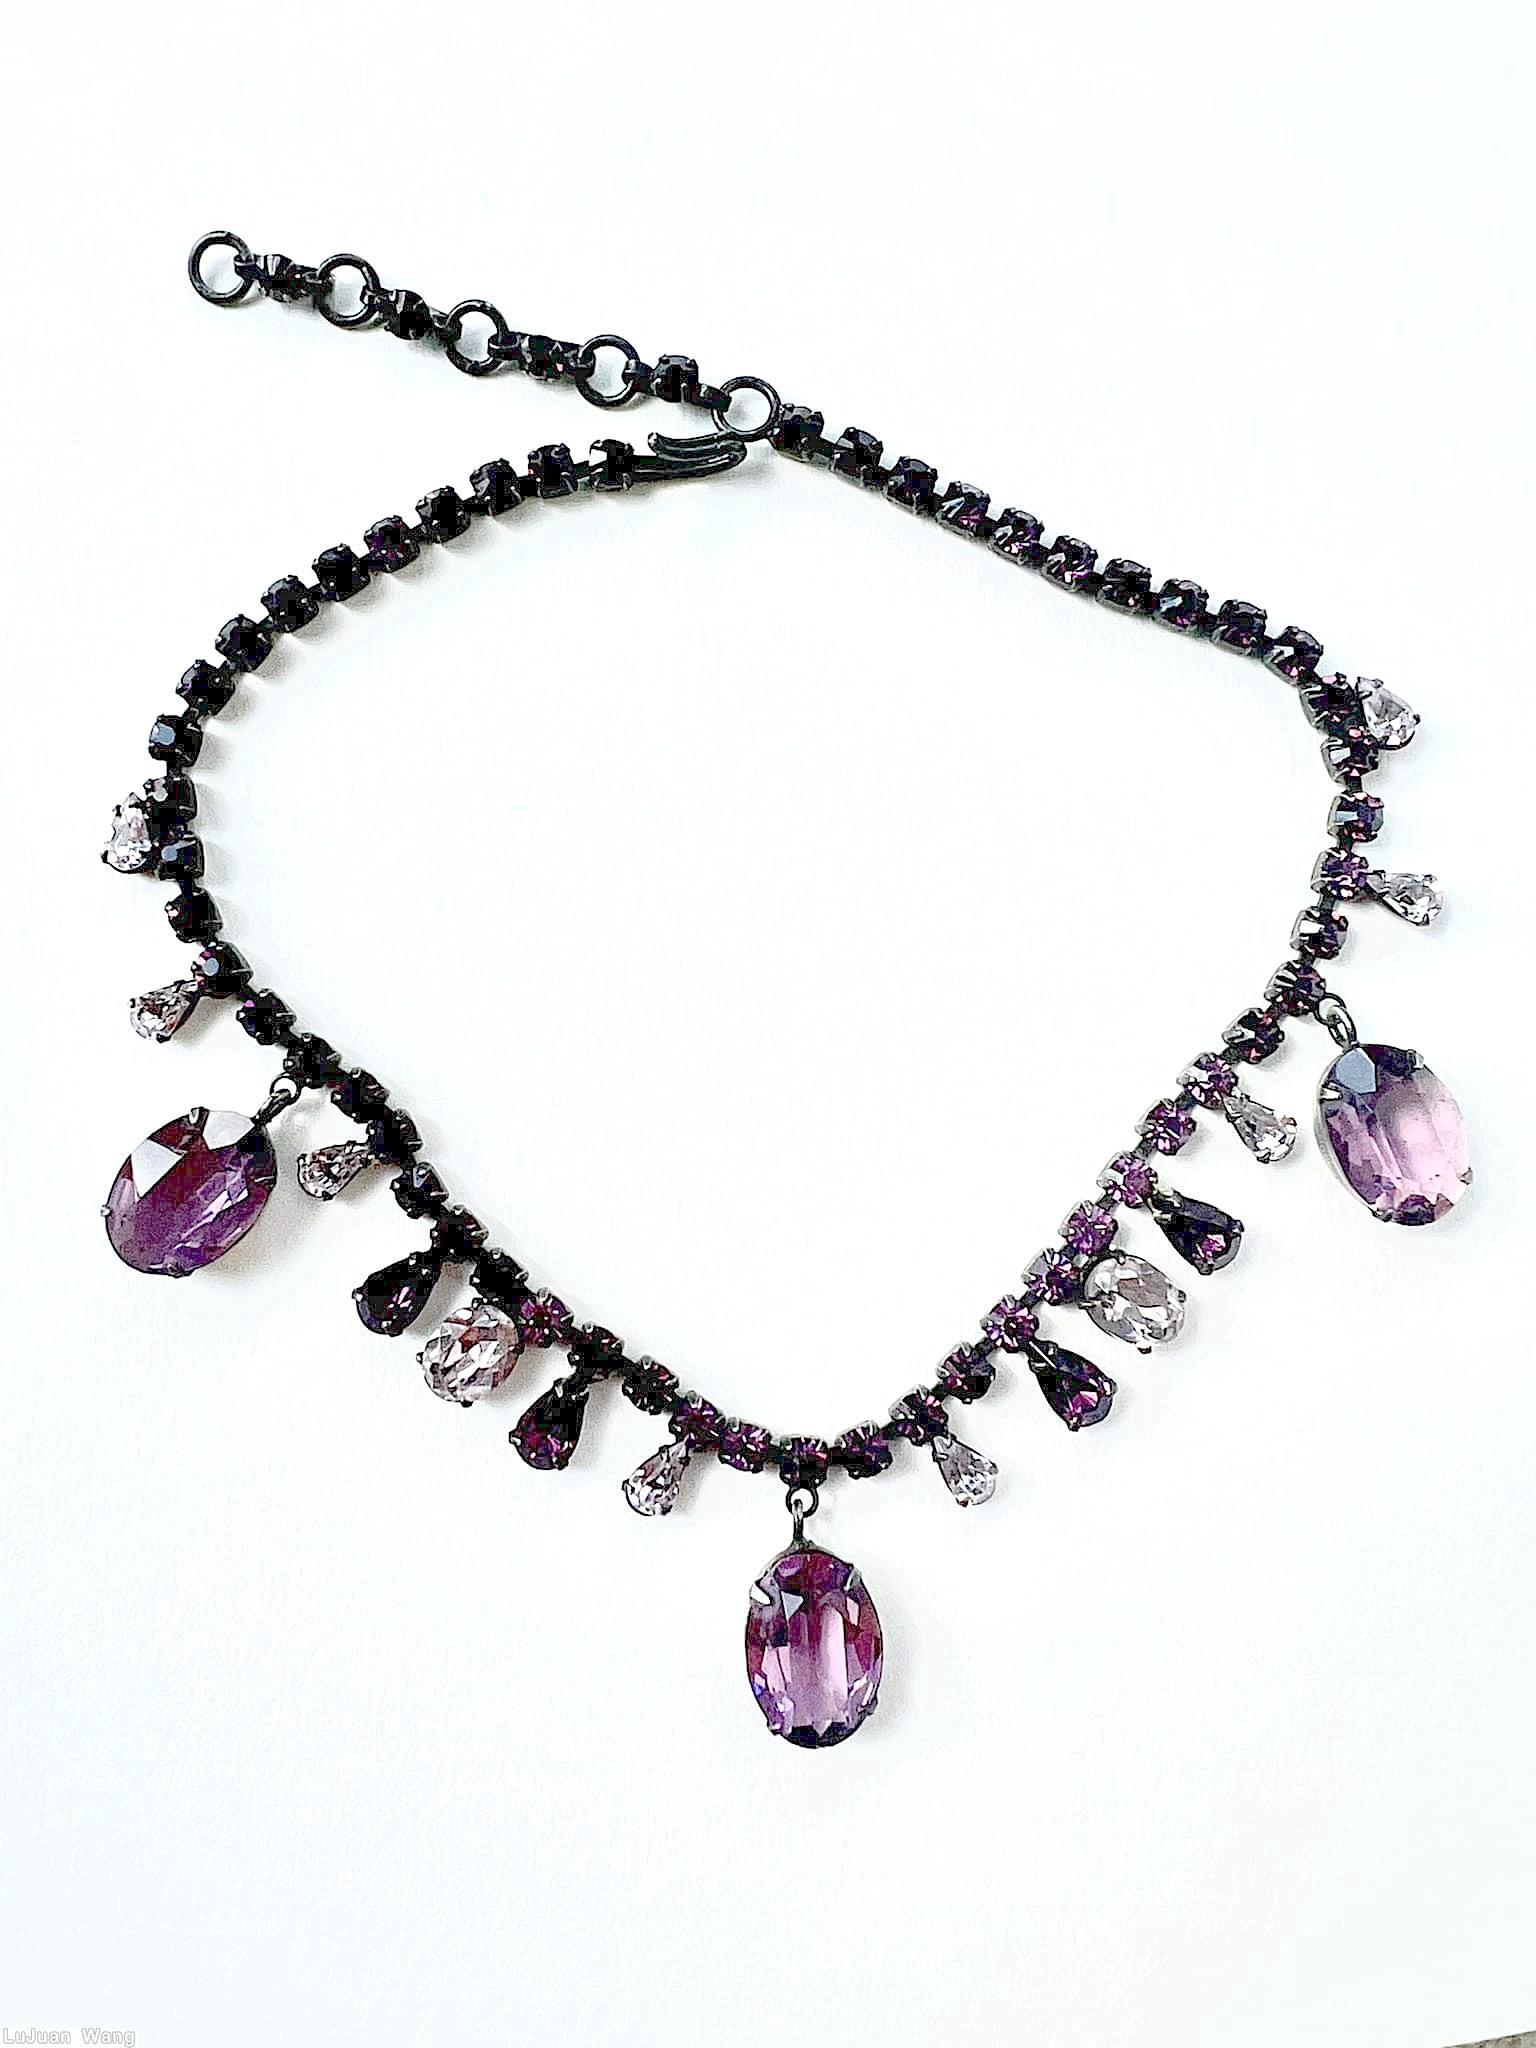 Schreiner single strand 3 dangling large oval stone 12 dangling small teardrop 2 small oval cab chain of small chaton purple large faceted dangling oval stone purple crystal gun metal jewelry